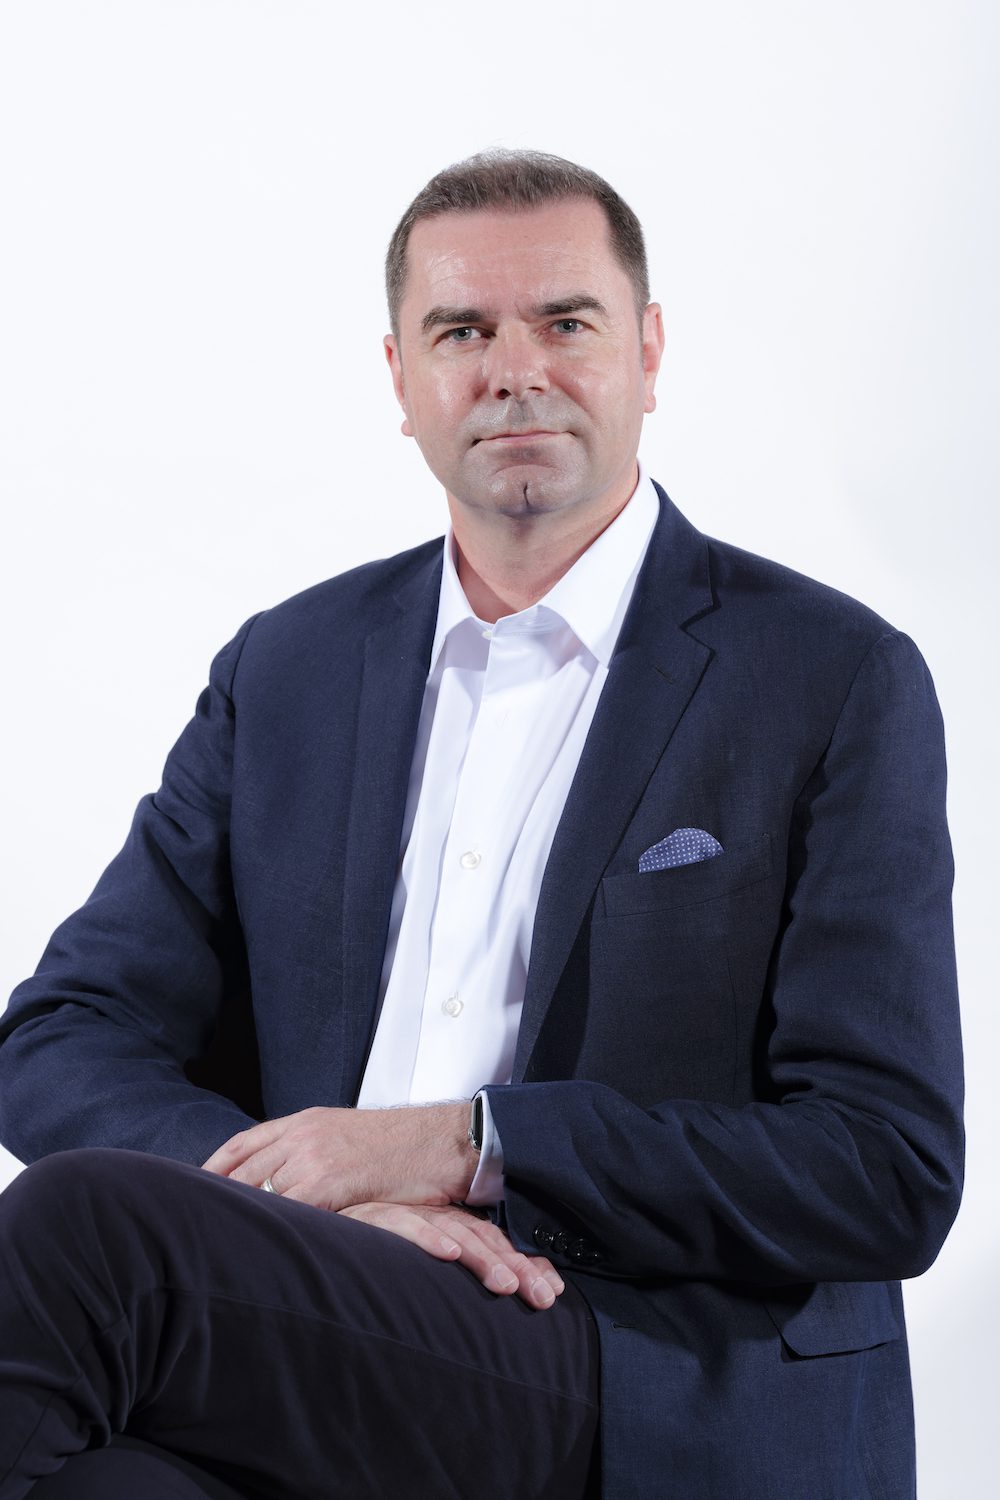 Wallem Group appoints John-Kaare Aune as new Chief Executive Officer